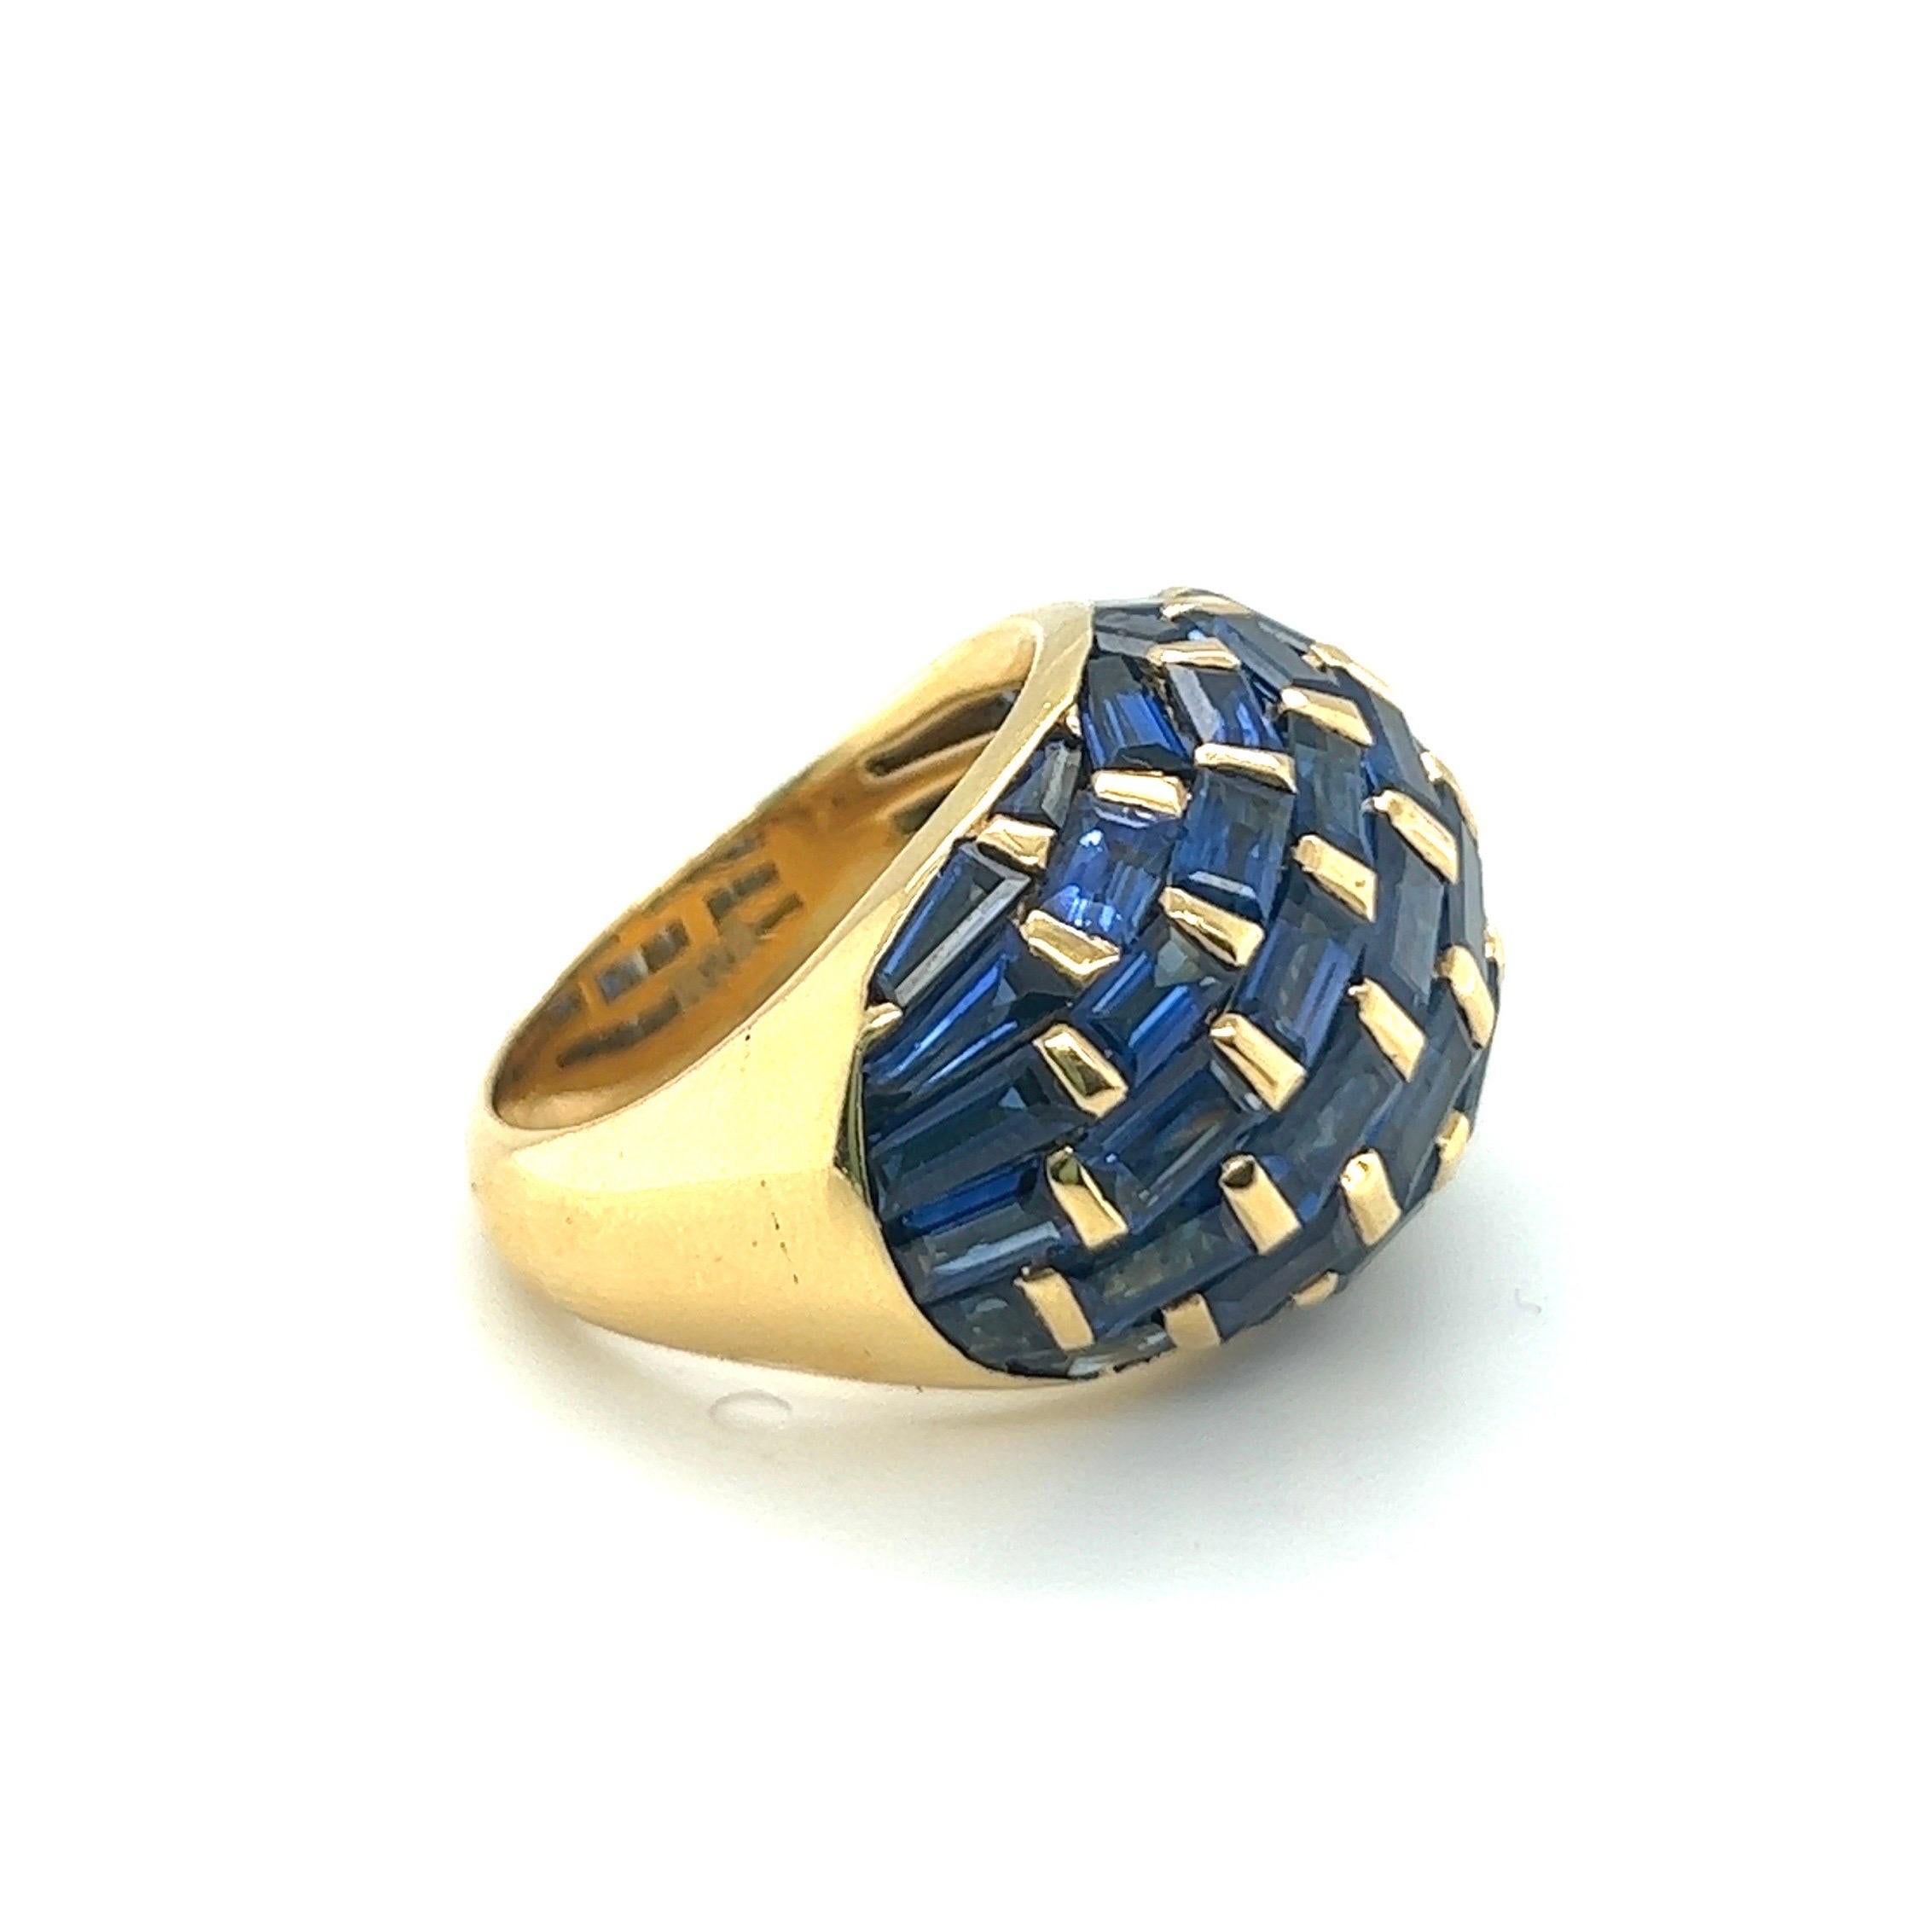 Baguette Cut 18 Karat Yellow Gold and Sapphire Cocktail Ring, circa 1970s For Sale